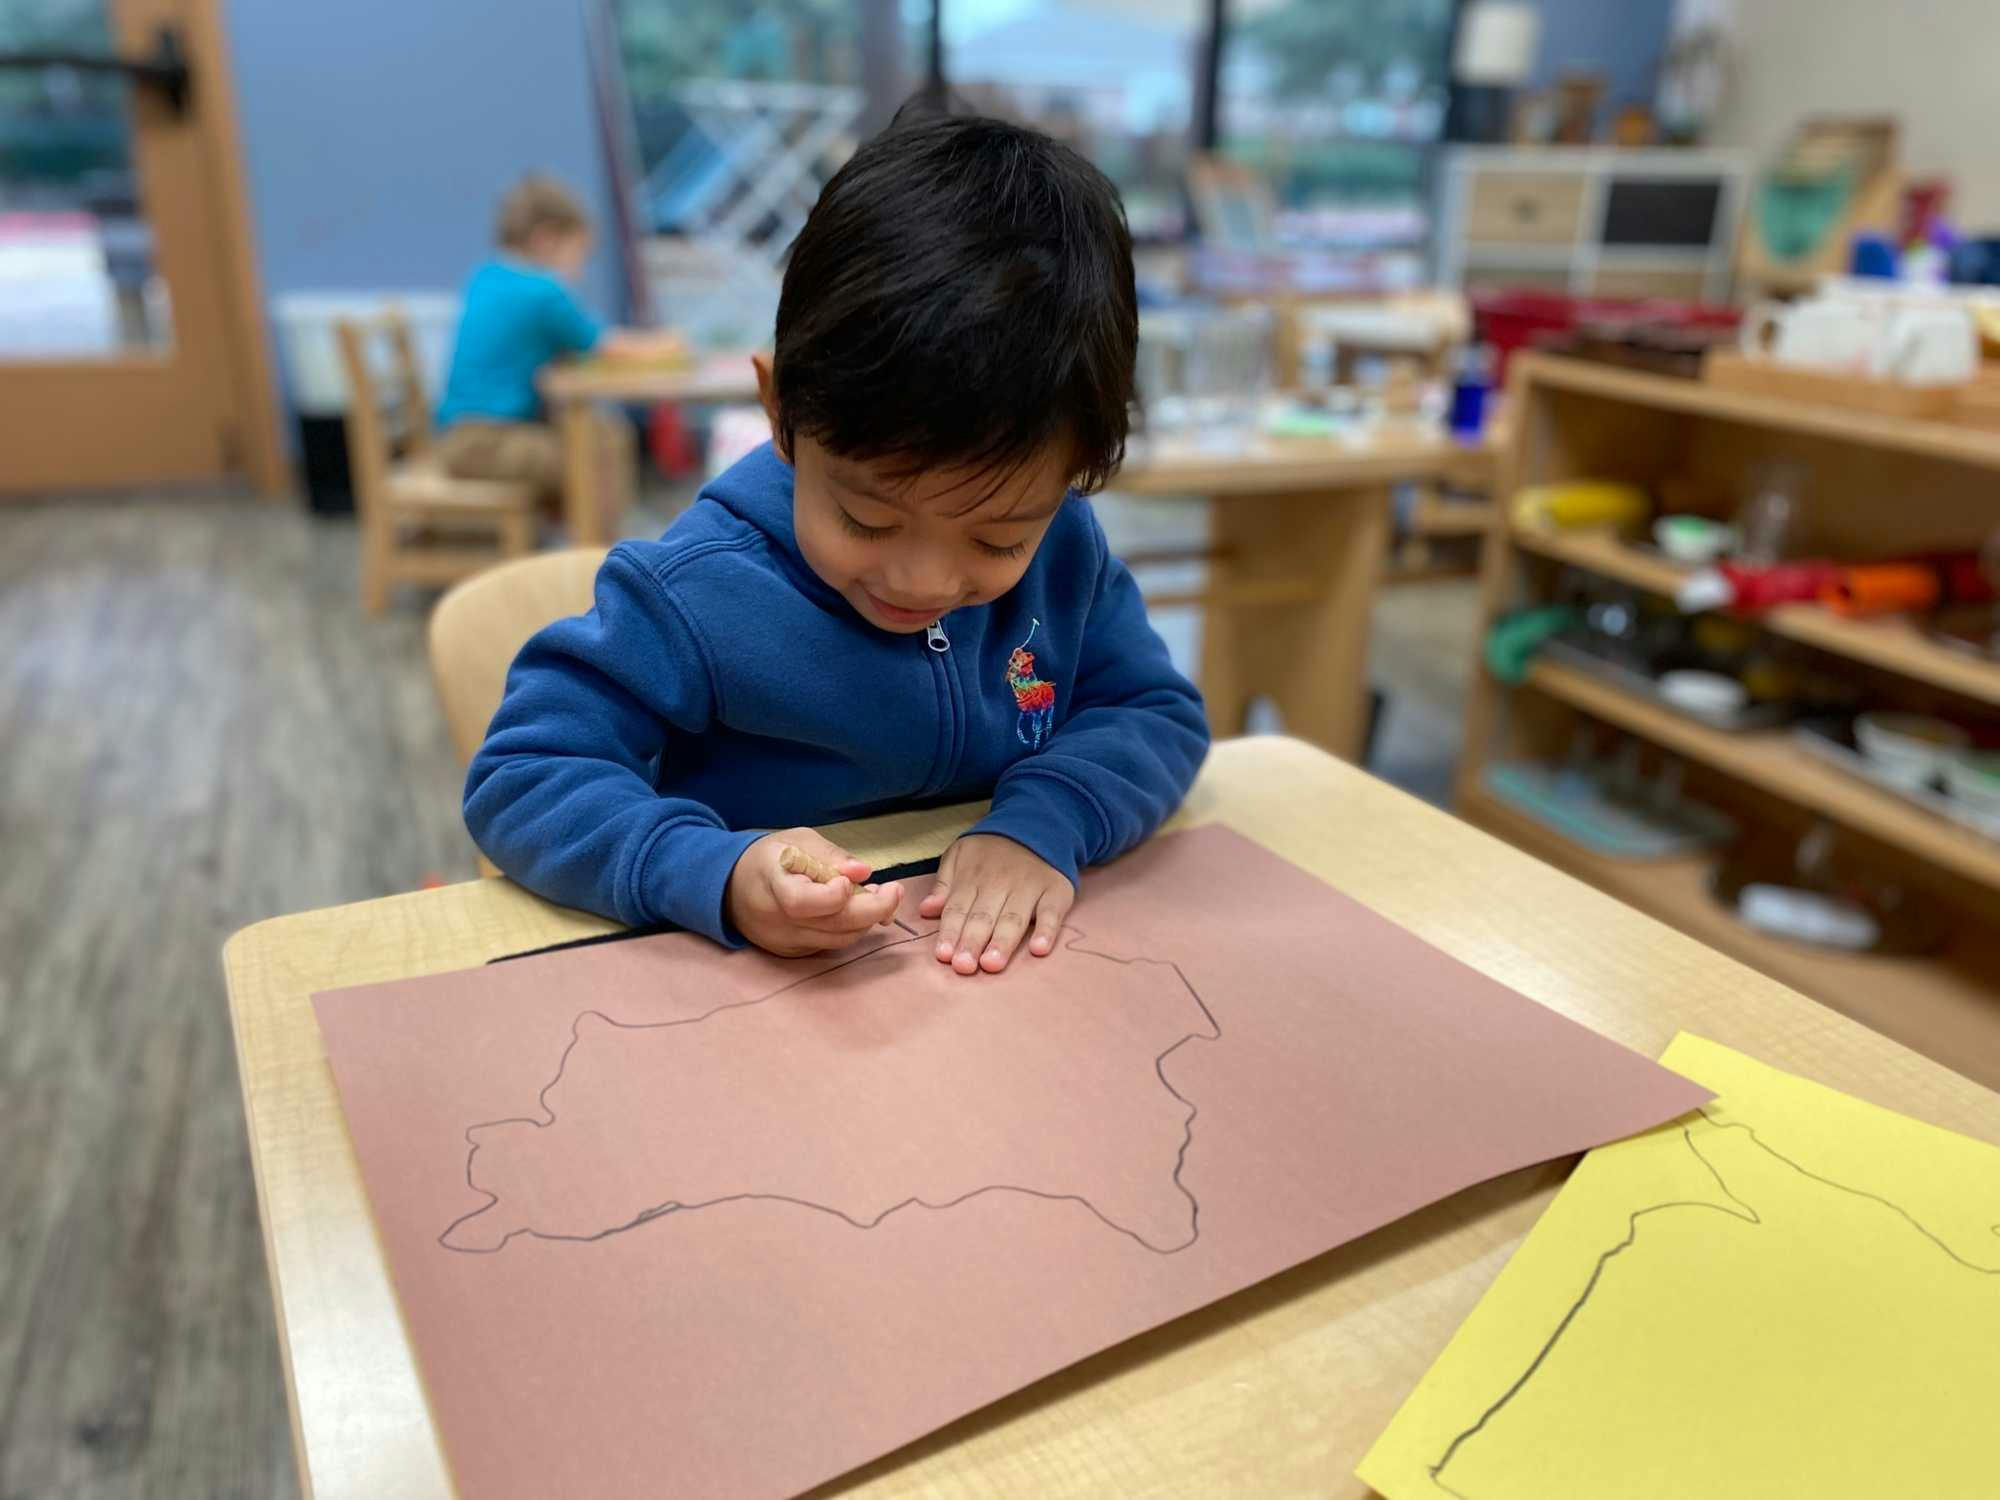 kindergarten-aged child draws map of United States of America in a well-organized Montessori classroom.